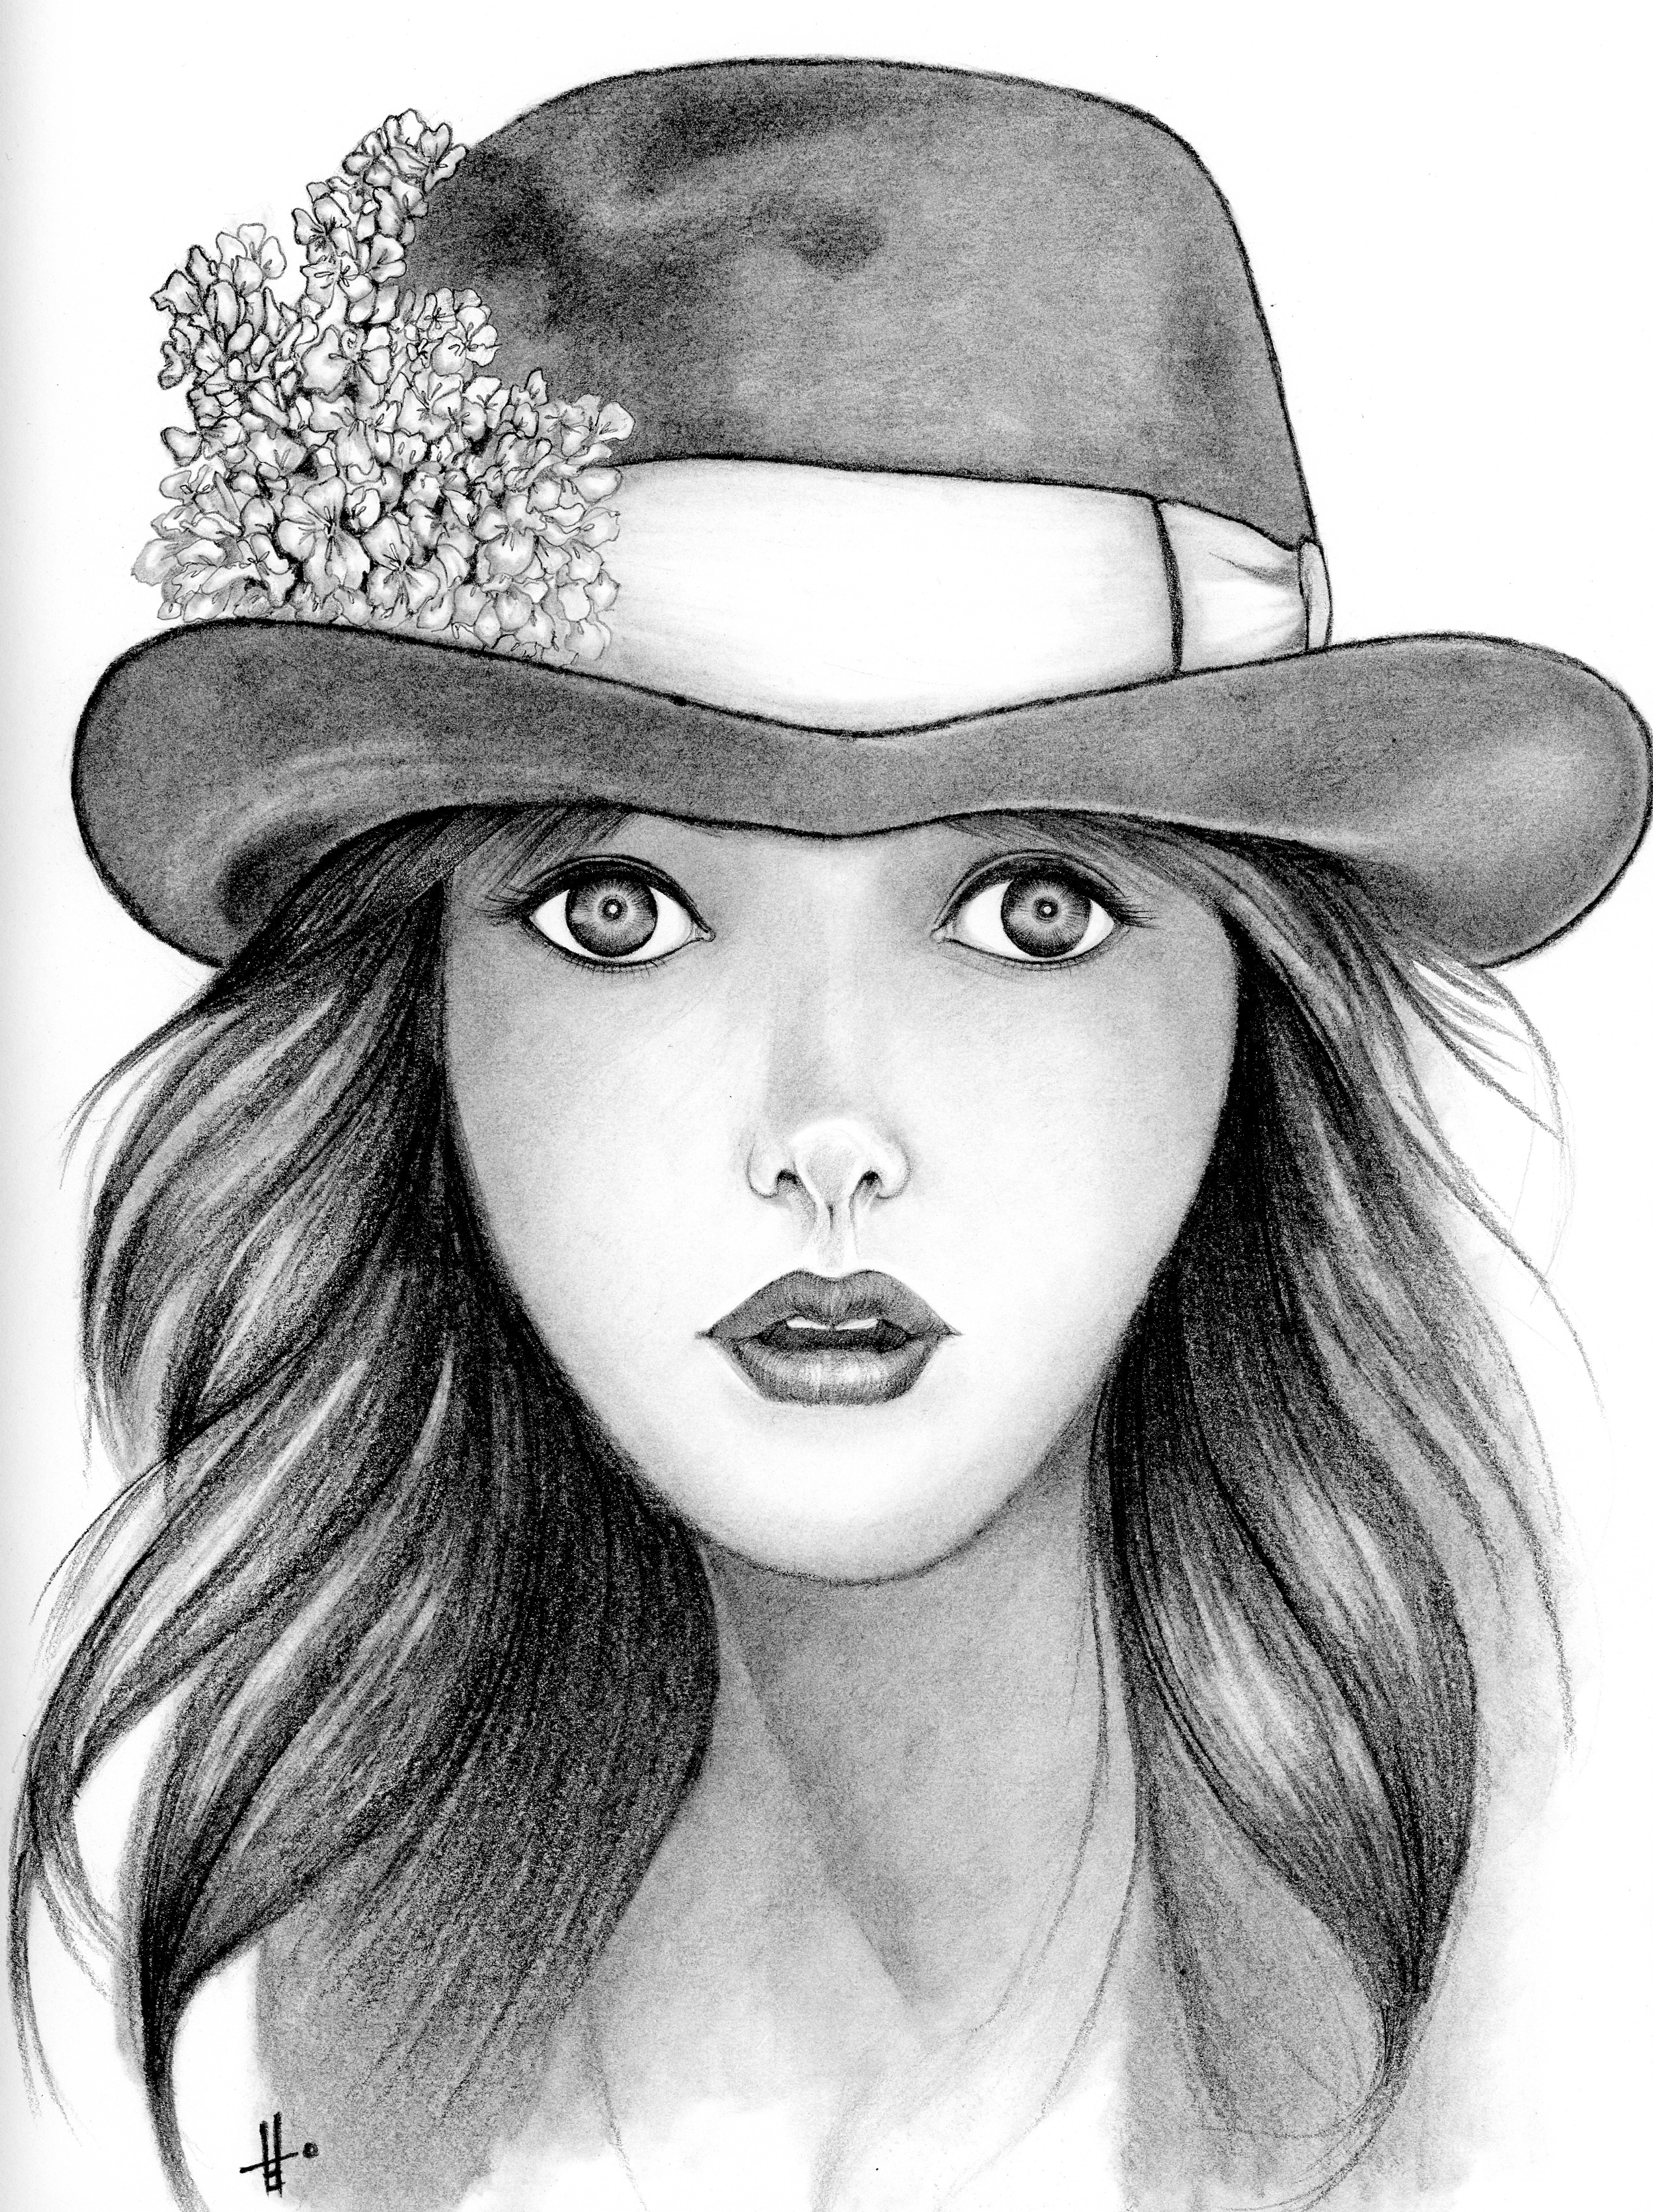 pencil sketch drawing of girl